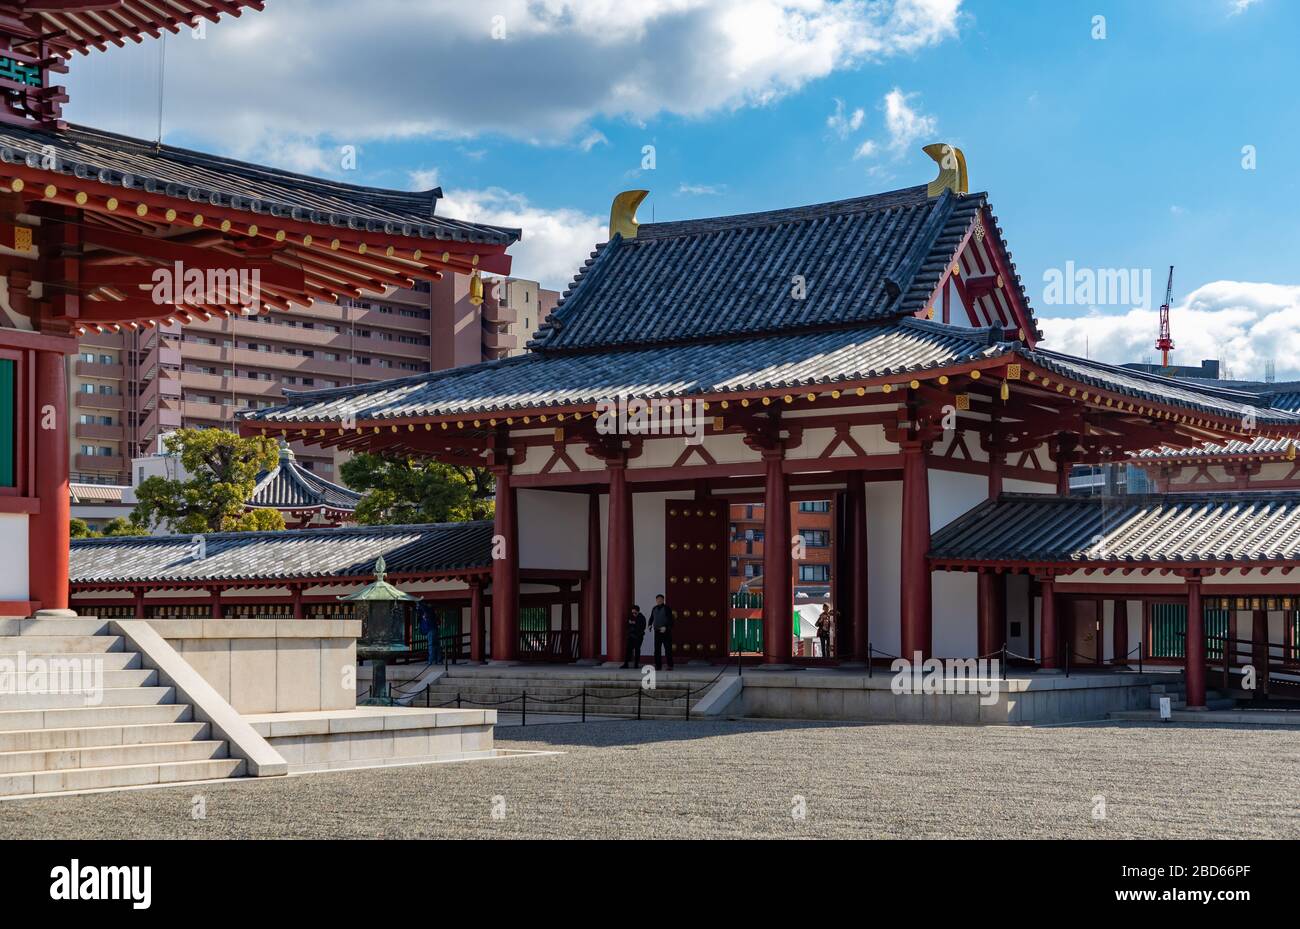 A picture of the Shitenno-ji Temple, namely one of its gates, as seen from inside the premises of the temple. Stock Photo